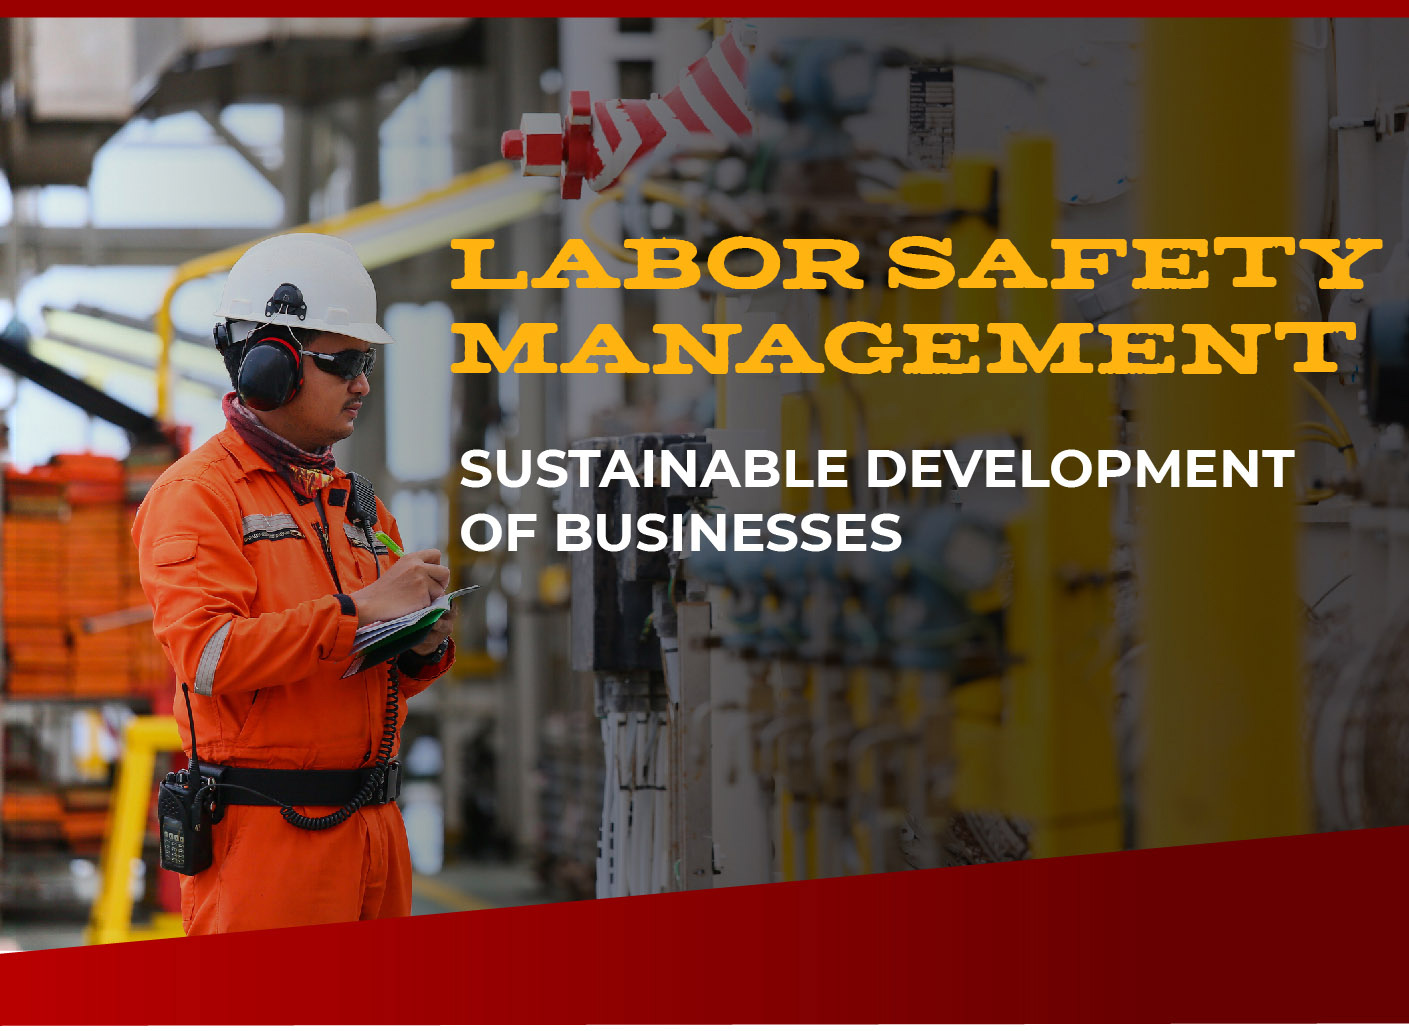 LABO SAFETY MANNAGEMENT SUSTAINABLE BEVELOPMENT OF BUSINESSES